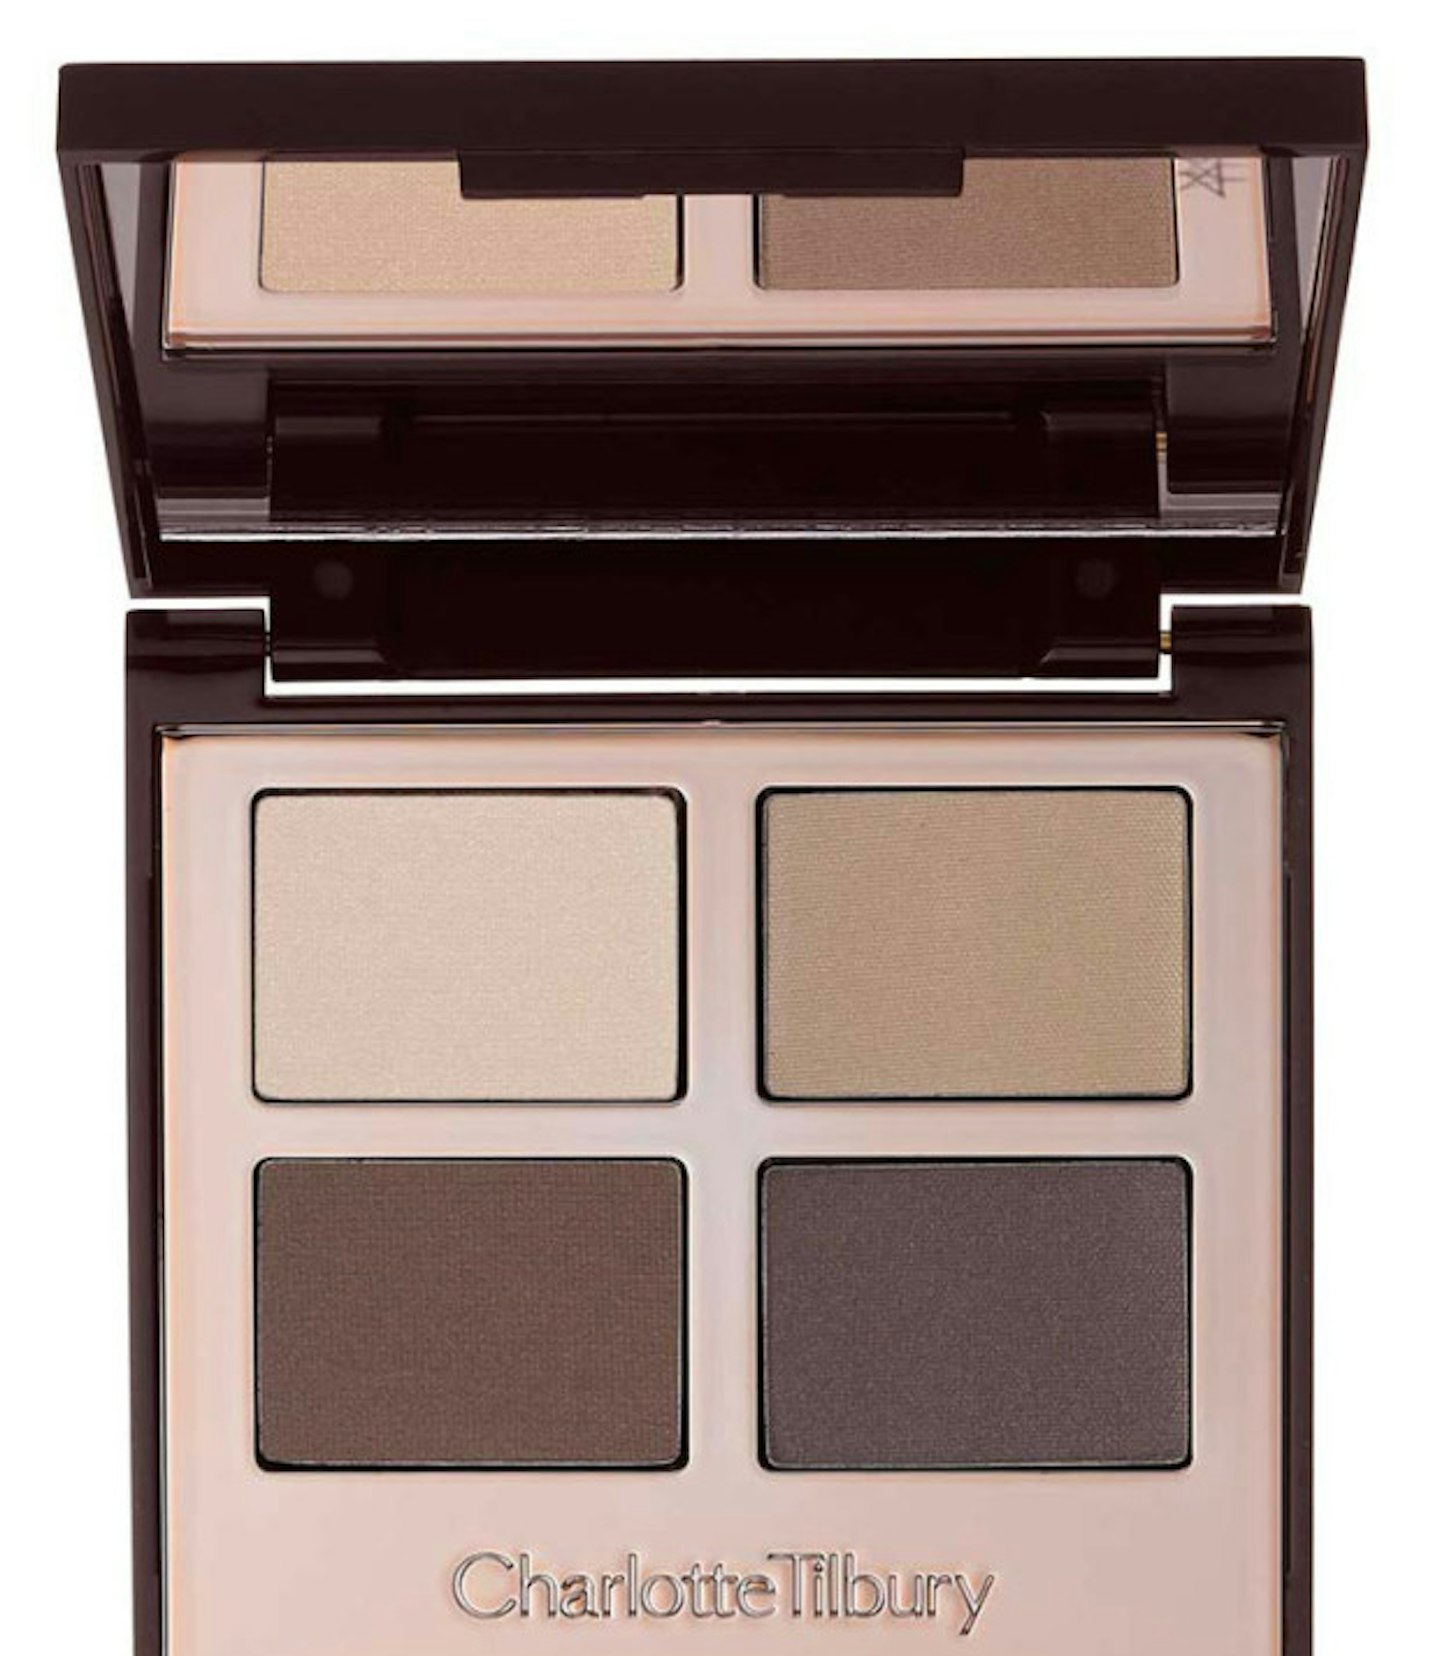 This palette made the perfect choice for chic and elegant wedding make-up